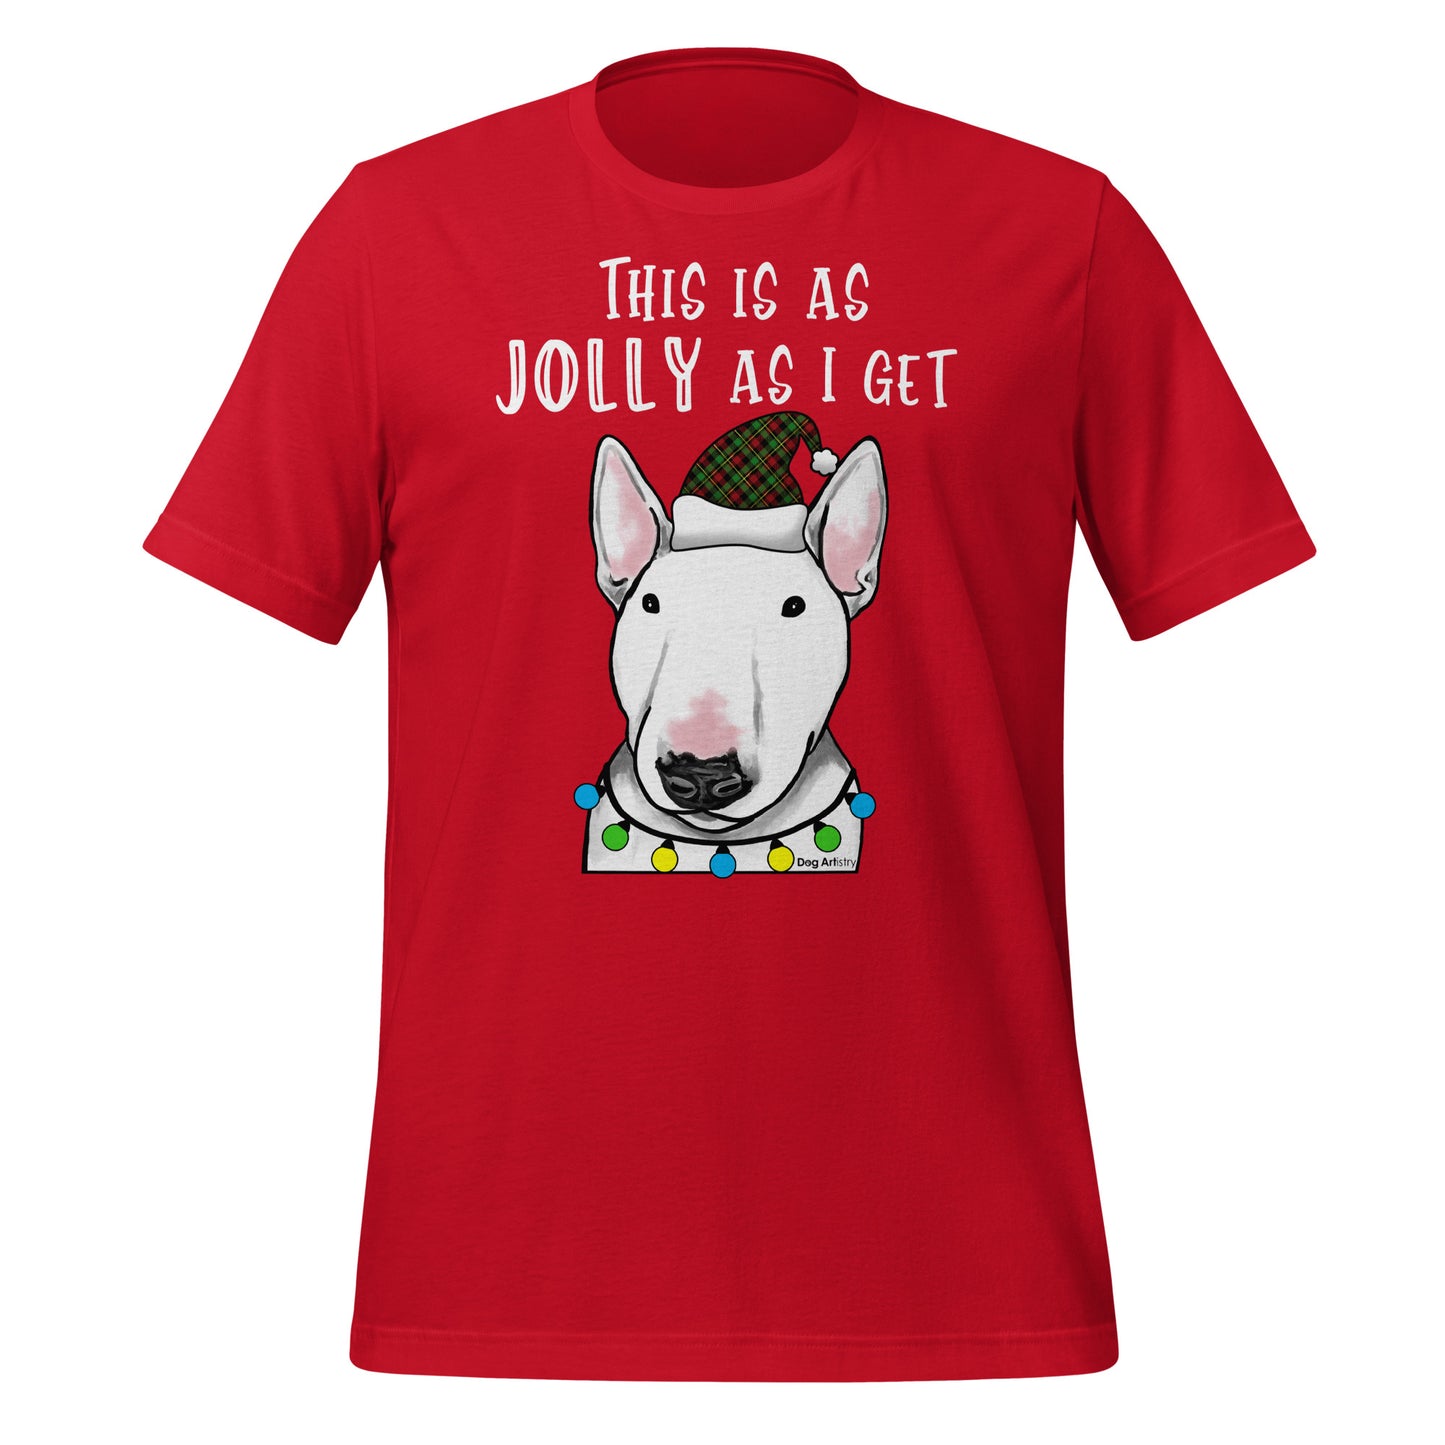 This is as Jolly as I get - English Bull Terrier holiday unisex t-shirt red by Dog Artistry